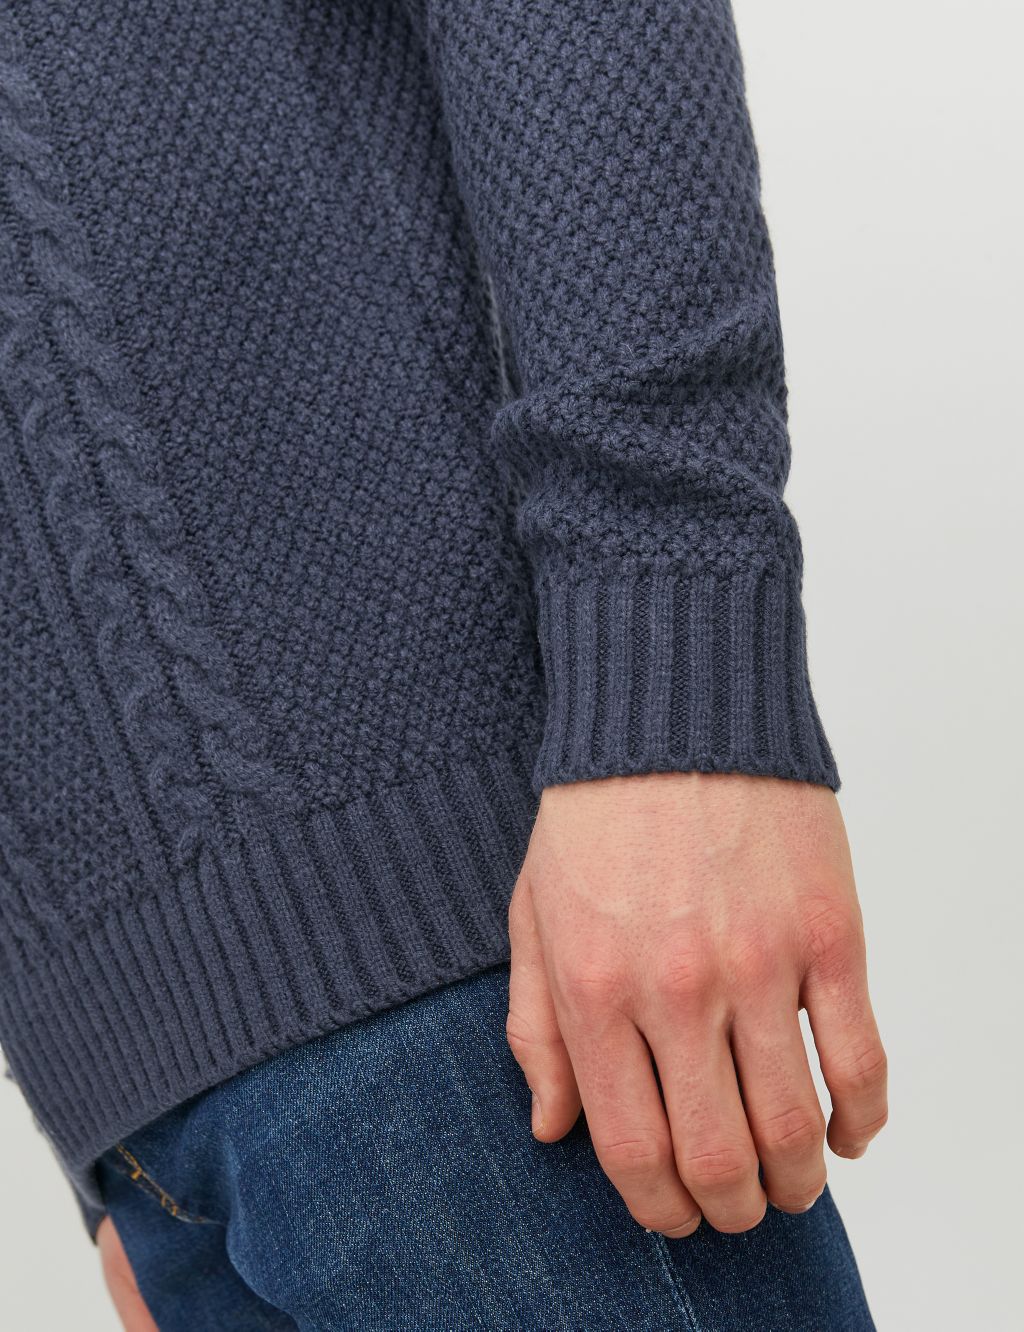 Textured Cable Crew Neck Jumper with Cotton image 6